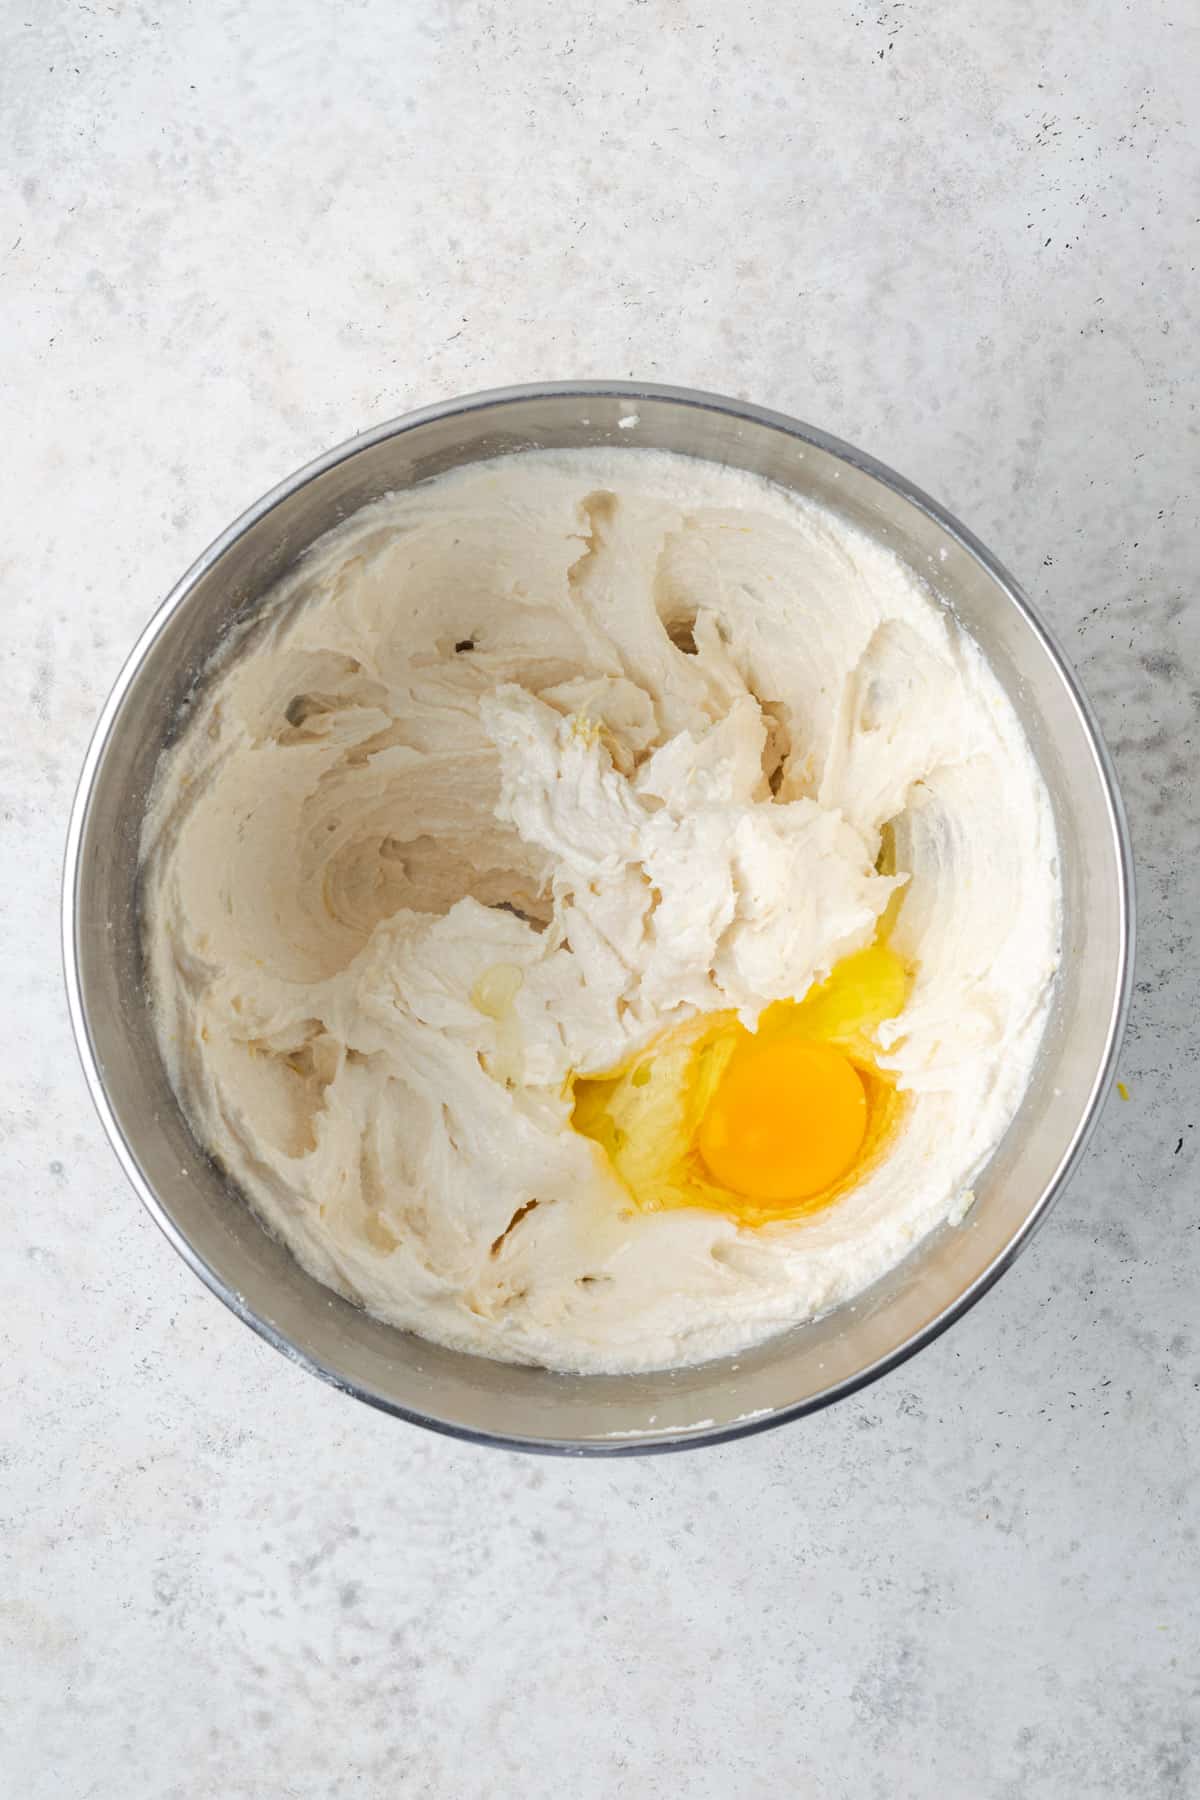 An egg added to the partially mixed lemon cake batter.